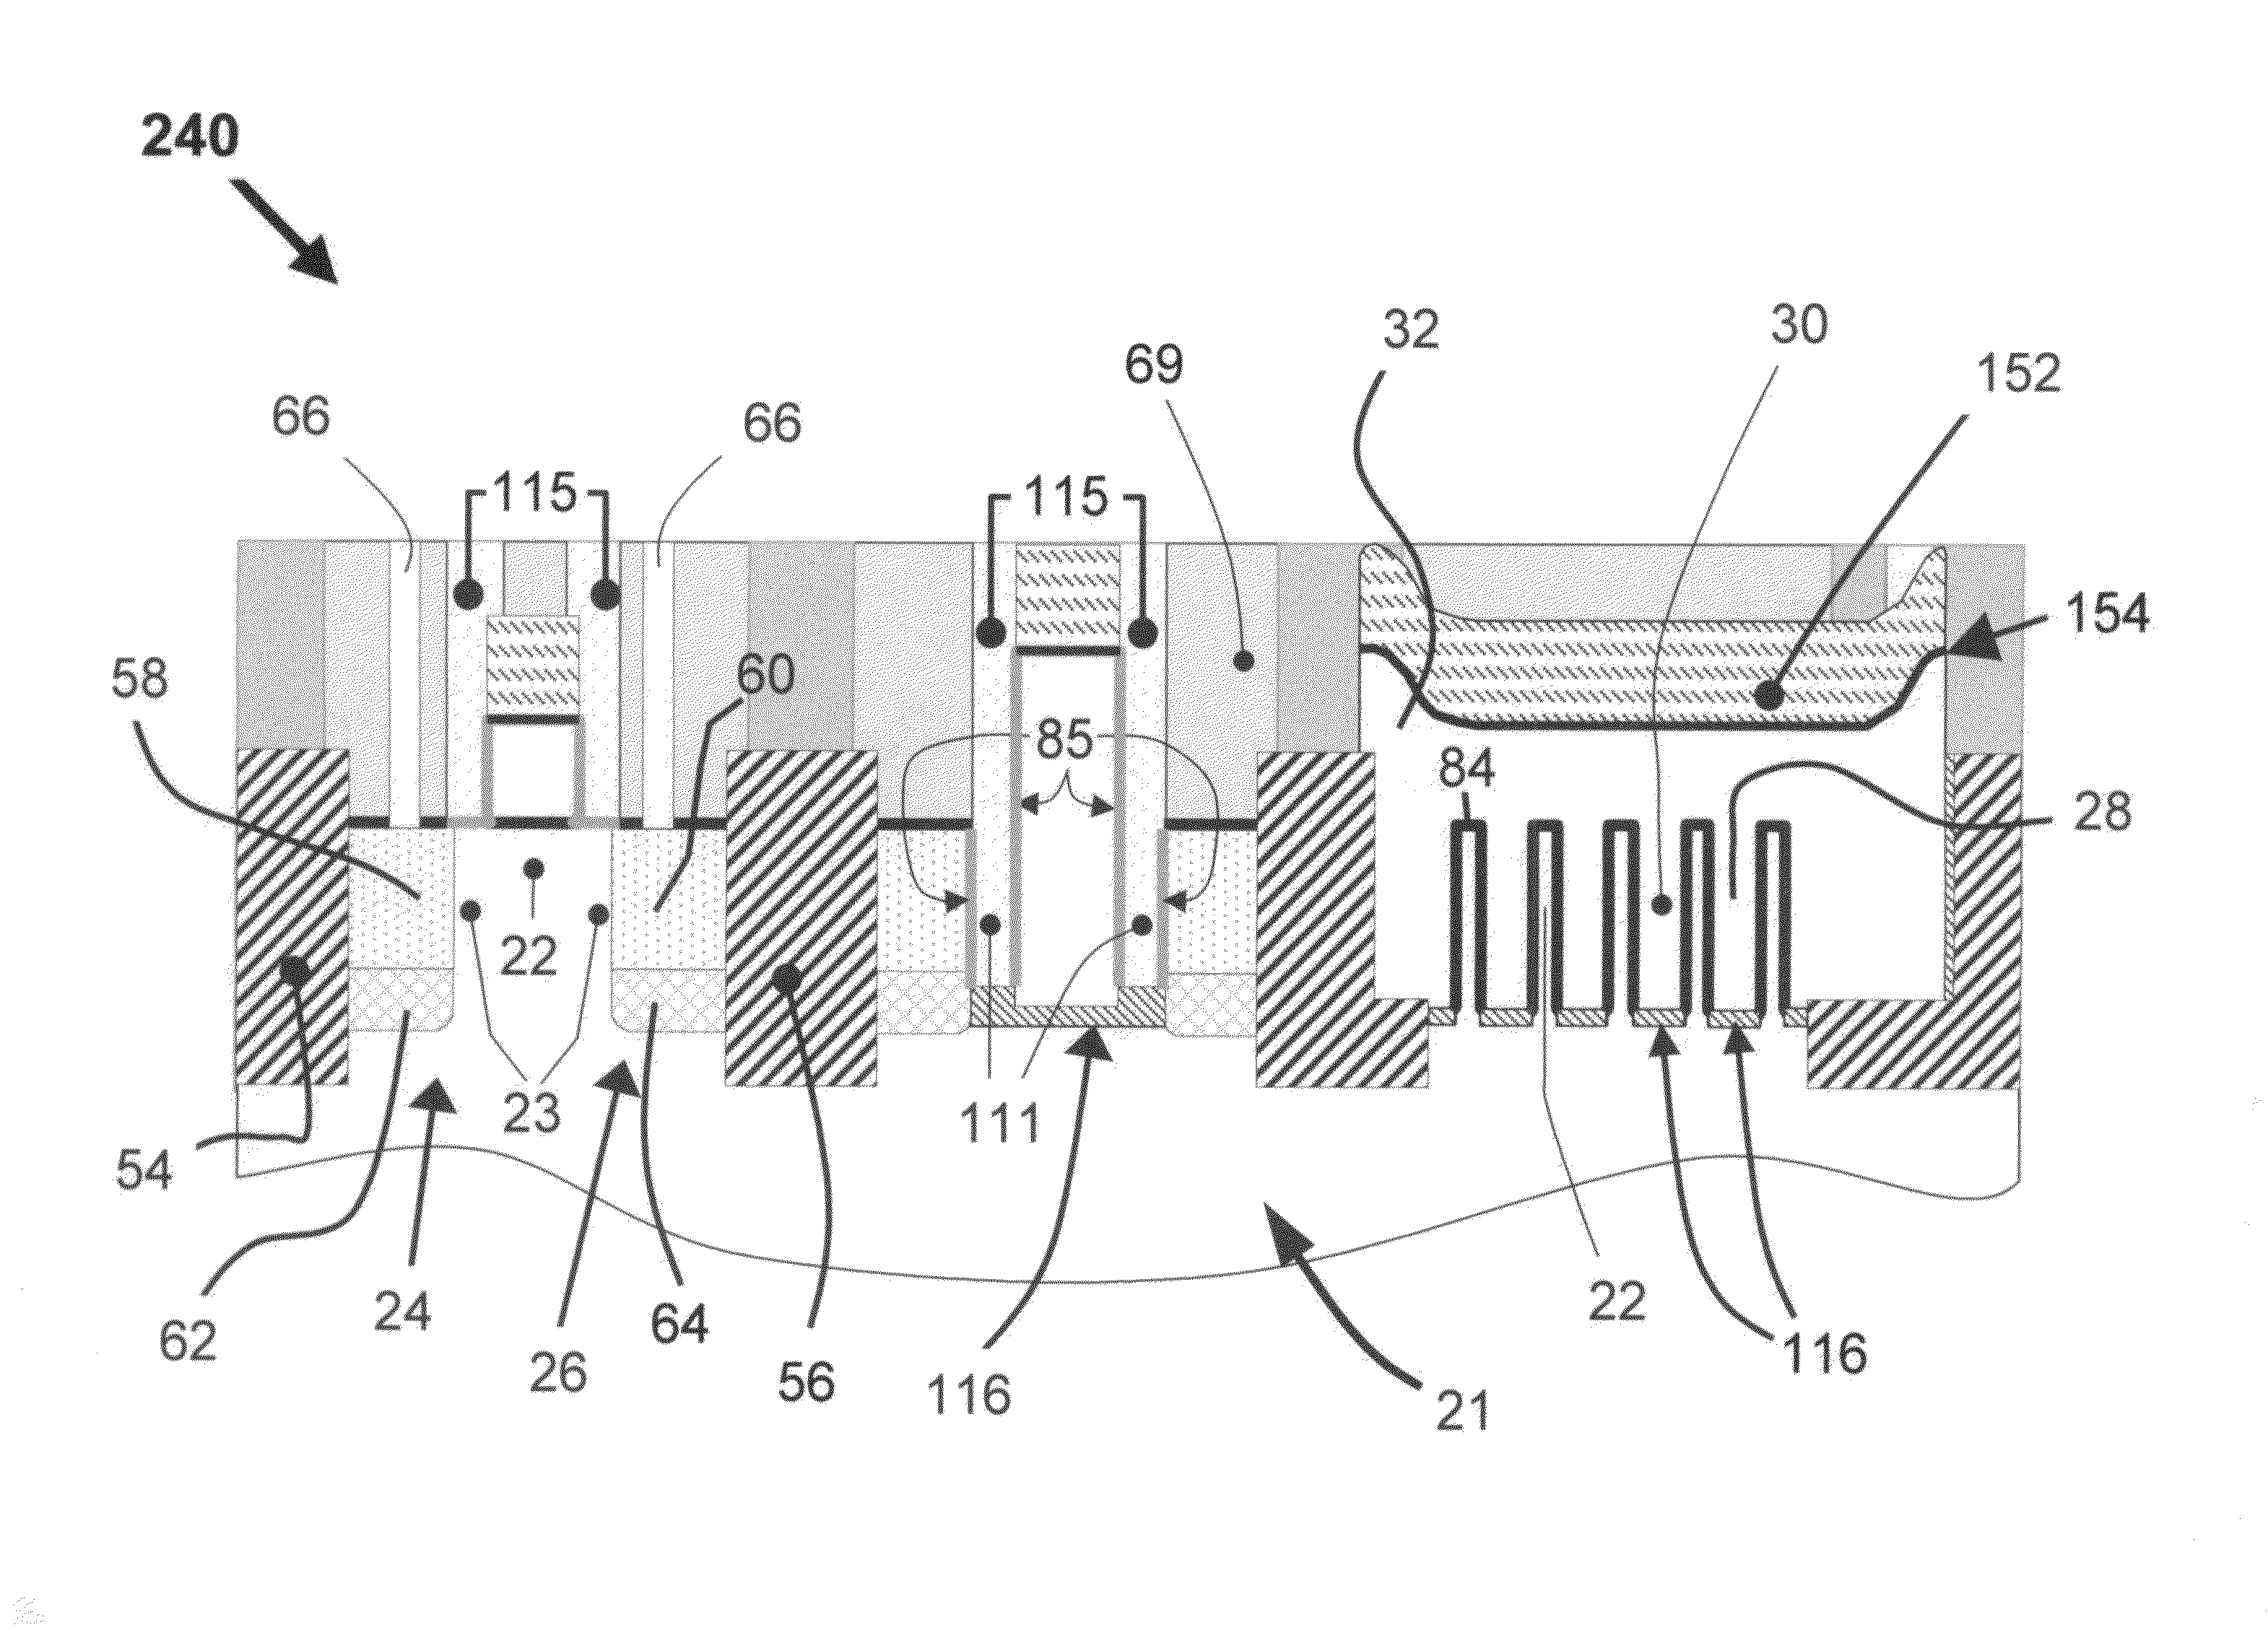 Castellated gate MOSFET tetrode capable of fully-depleted operation